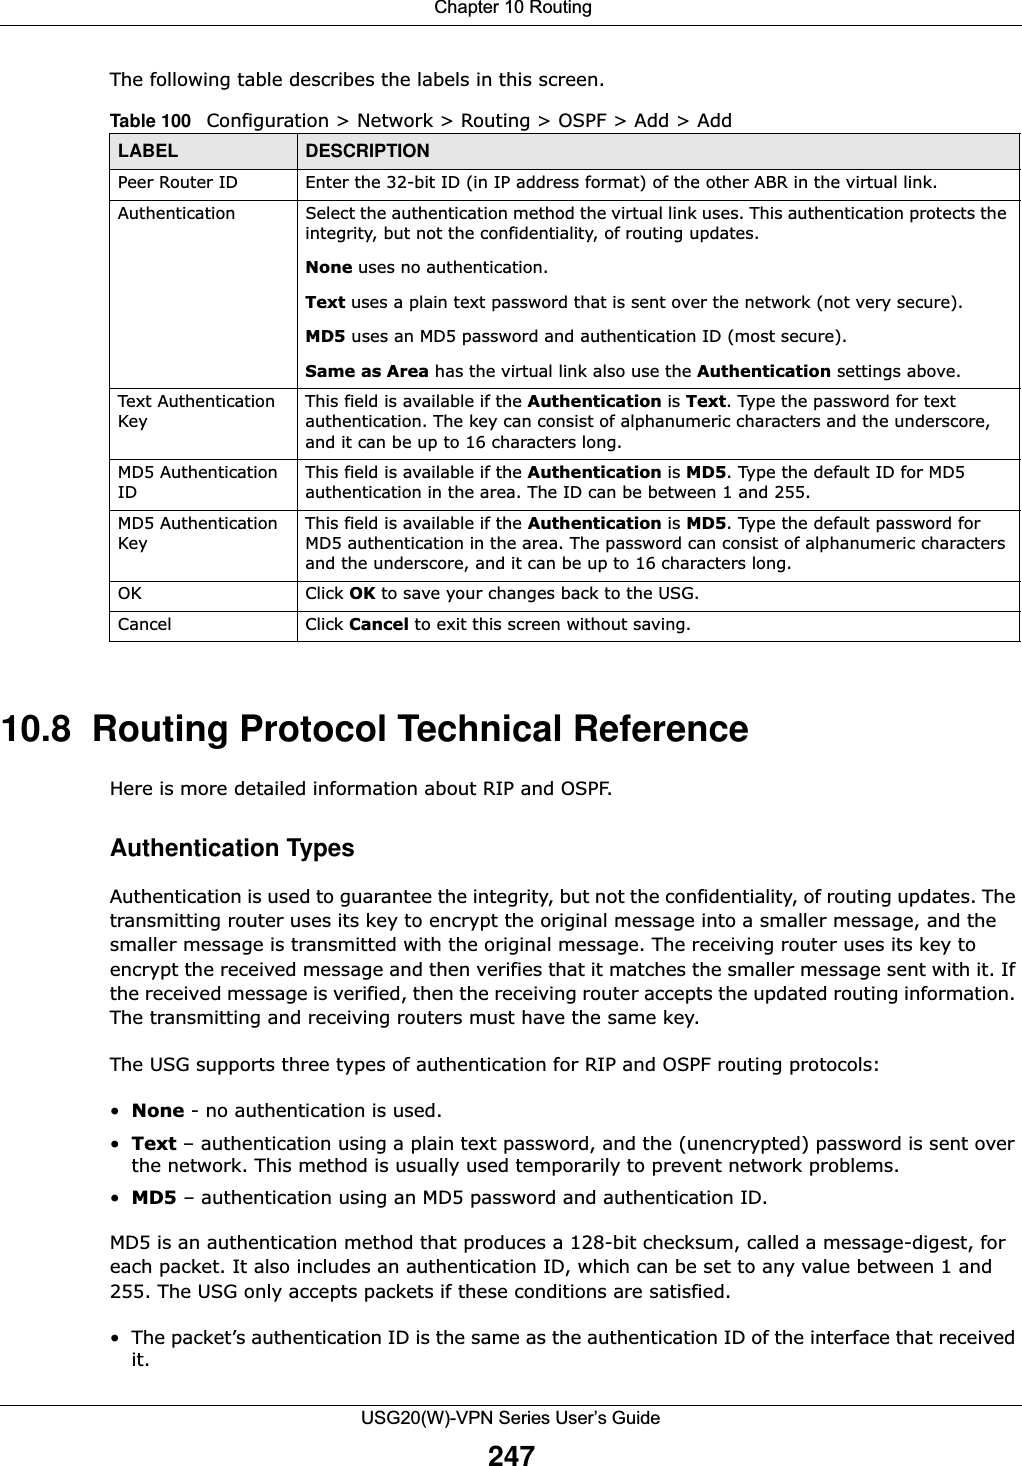  Chapter 10 RoutingUSG20(W)-VPN Series User’s Guide247The following table describes the labels in this screen.  10.8  Routing Protocol Technical ReferenceHere is more detailed information about RIP and OSPF.Authentication TypesAuthentication is used to guarantee the integrity, but not the confidentiality, of routing updates. The transmitting router uses its key to encrypt the original message into a smaller message, and the smaller message is transmitted with the original message. The receiving router uses its key to encrypt the received message and then verifies that it matches the smaller message sent with it. If the received message is verified, then the receiving router accepts the updated routing information. The transmitting and receiving routers must have the same key. The USG supports three types of authentication for RIP and OSPF routing protocols:•None - no authentication is used.•Text – authentication using a plain text password, and the (unencrypted) password is sent over the network. This method is usually used temporarily to prevent network problems.•MD5 – authentication using an MD5 password and authentication ID.MD5 is an authentication method that produces a 128-bit checksum, called a message-digest, for each packet. It also includes an authentication ID, which can be set to any value between 1 and 255. The USG only accepts packets if these conditions are satisfied.• The packet’s authentication ID is the same as the authentication ID of the interface that received it.Table 100   Configuration &gt; Network &gt; Routing &gt; OSPF &gt; Add &gt; AddLABEL DESCRIPTIONPeer Router ID Enter the 32-bit ID (in IP address format) of the other ABR in the virtual link.Authentication Select the authentication method the virtual link uses. This authentication protects the integrity, but not the confidentiality, of routing updates. None uses no authentication.Text uses a plain text password that is sent over the network (not very secure). MD5 uses an MD5 password and authentication ID (most secure). Same as Area has the virtual link also use the Authentication settings above.Text Authentication KeyThis field is available if the Authentication is Text. Type the password for text authentication. The key can consist of alphanumeric characters and the underscore, and it can be up to 16 characters long.MD5 Authentication IDThis field is available if the Authentication is MD5. Type the default ID for MD5 authentication in the area. The ID can be between 1 and 255.MD5 Authentication KeyThis field is available if the Authentication is MD5. Type the default password for MD5 authentication in the area. The password can consist of alphanumeric characters and the underscore, and it can be up to 16 characters long.OK Click OK to save your changes back to the USG.Cancel Click Cancel to exit this screen without saving.